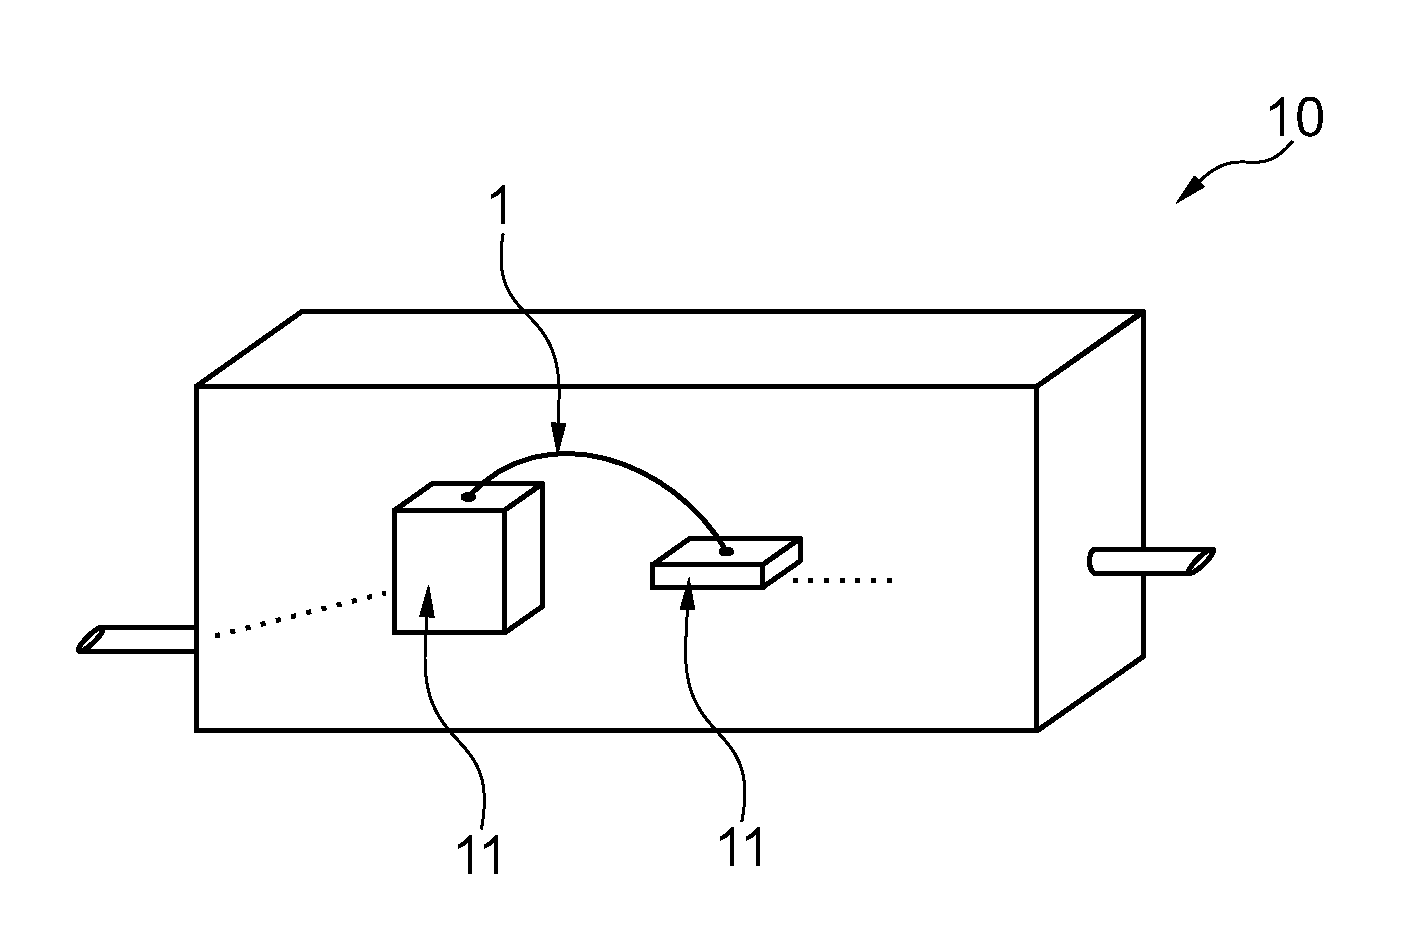 Copper bond wire and method of making the same